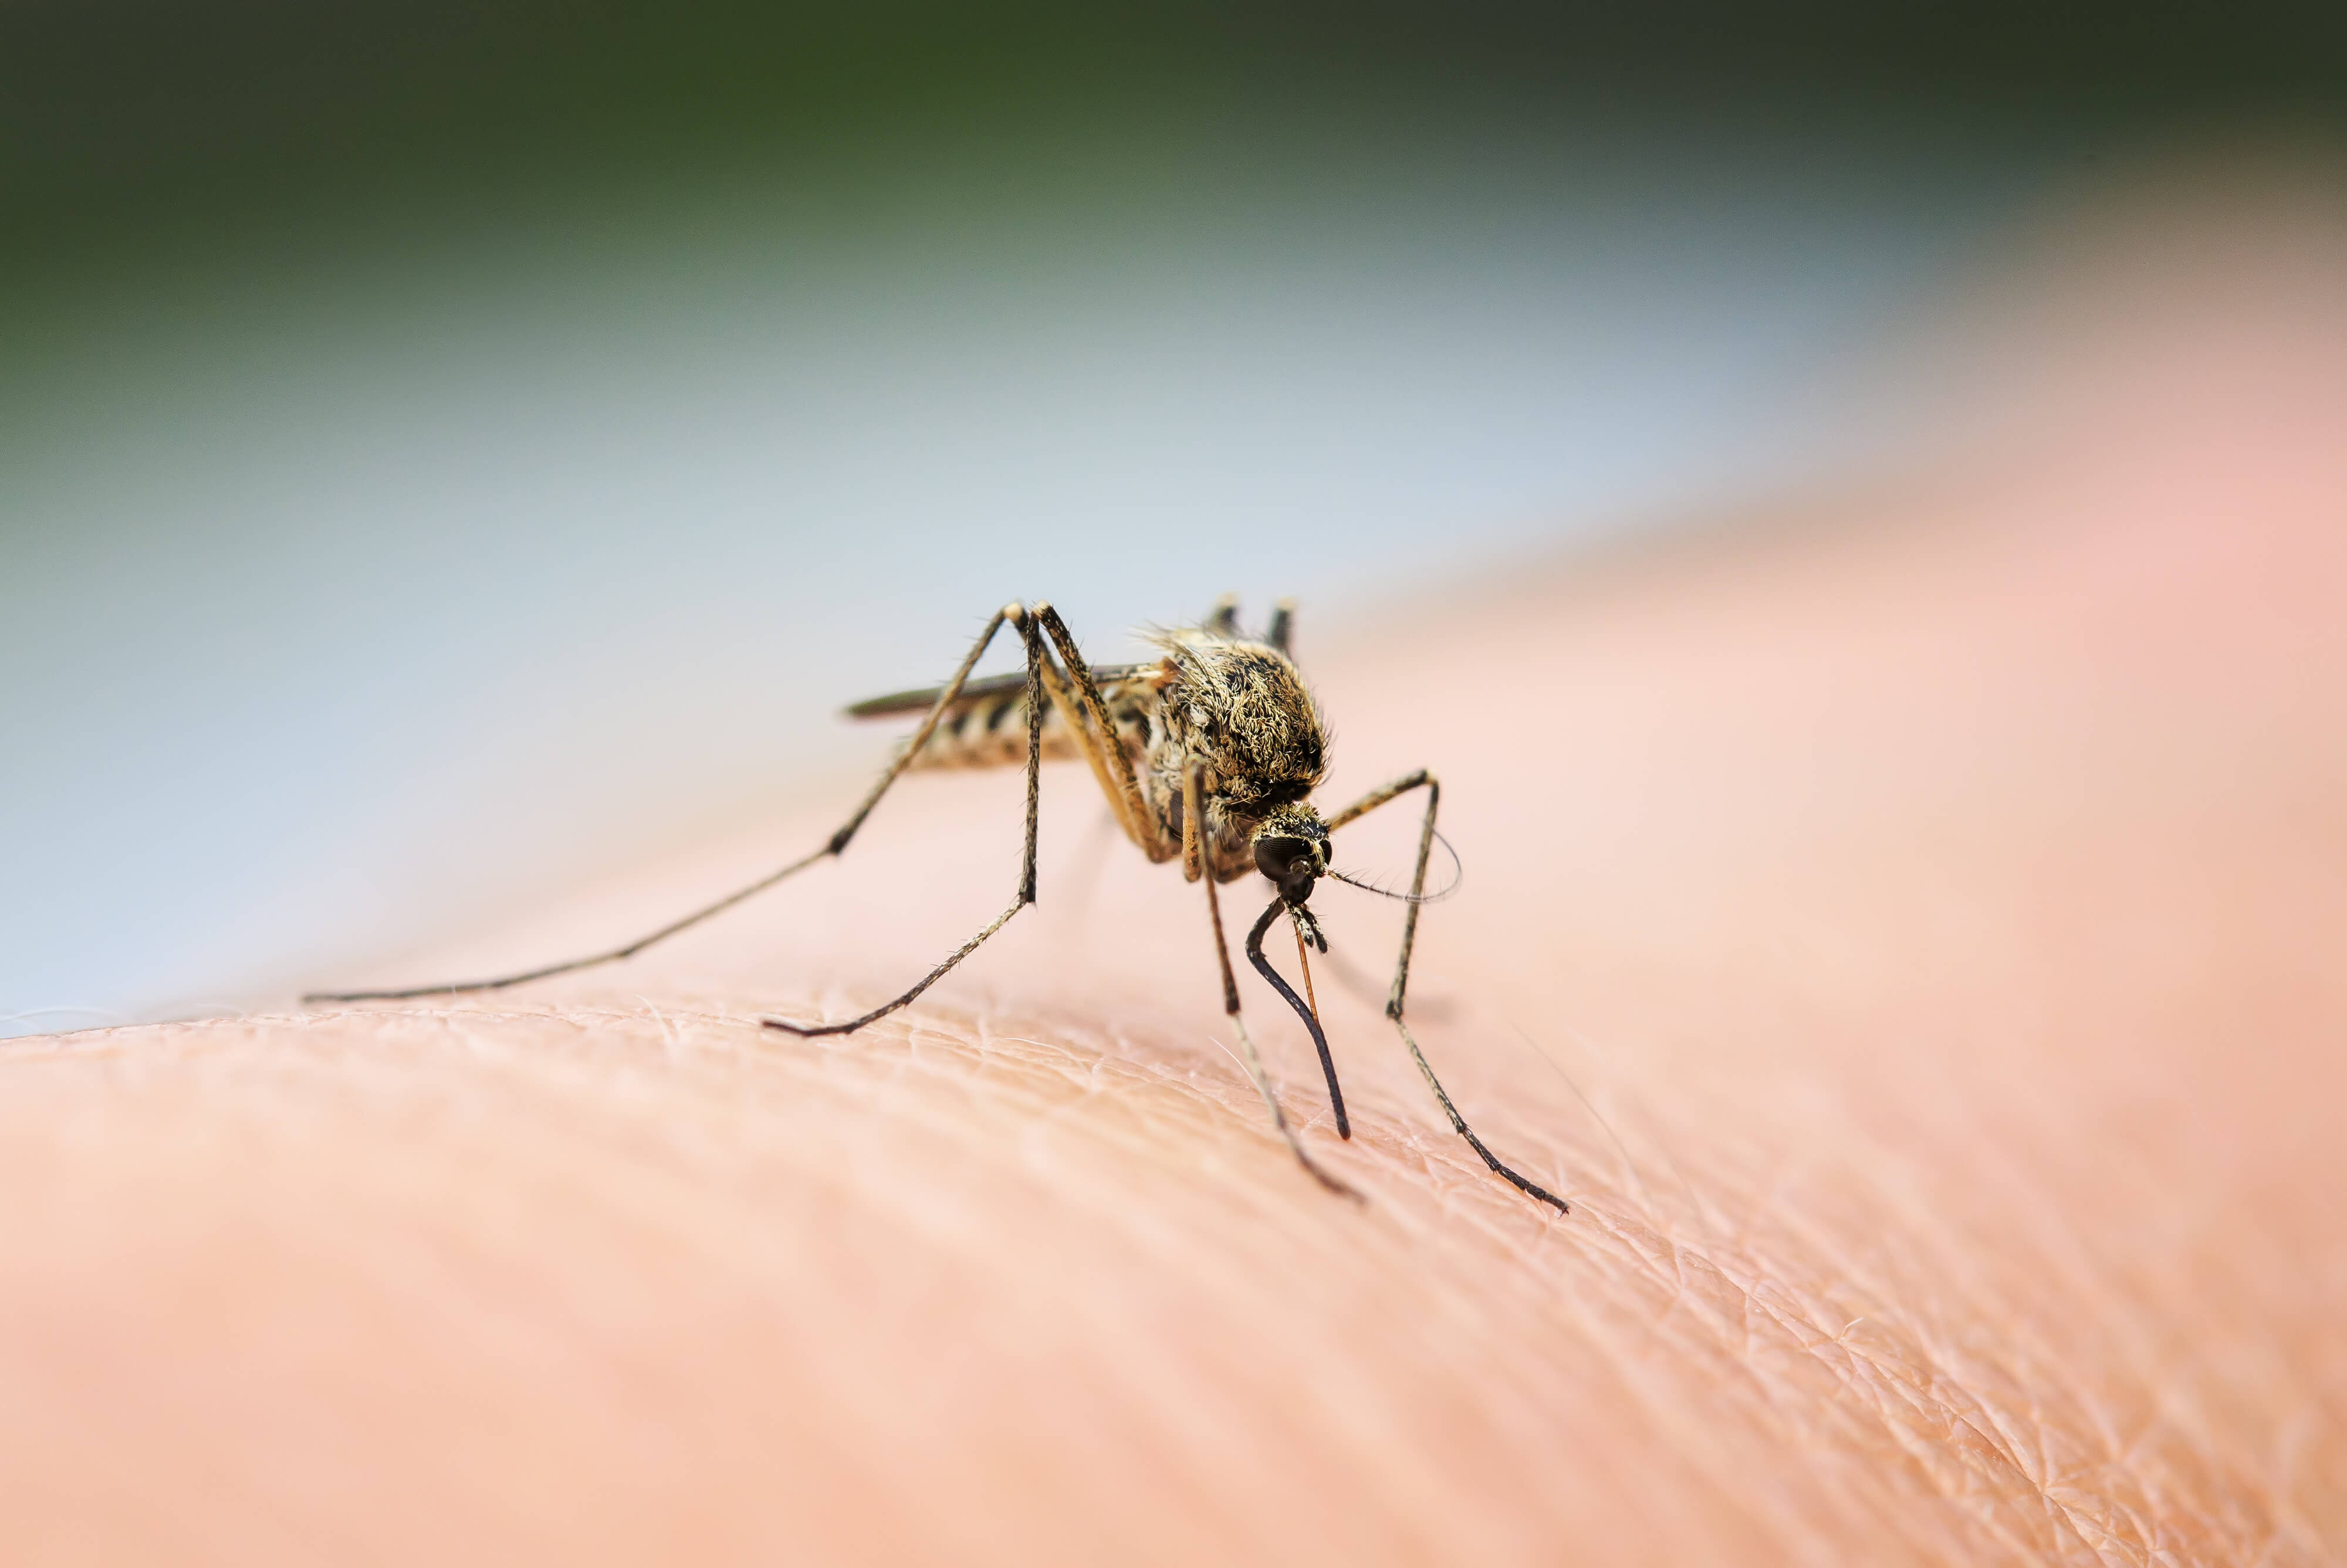 Mosquitos kill over 400.000 people globally every year